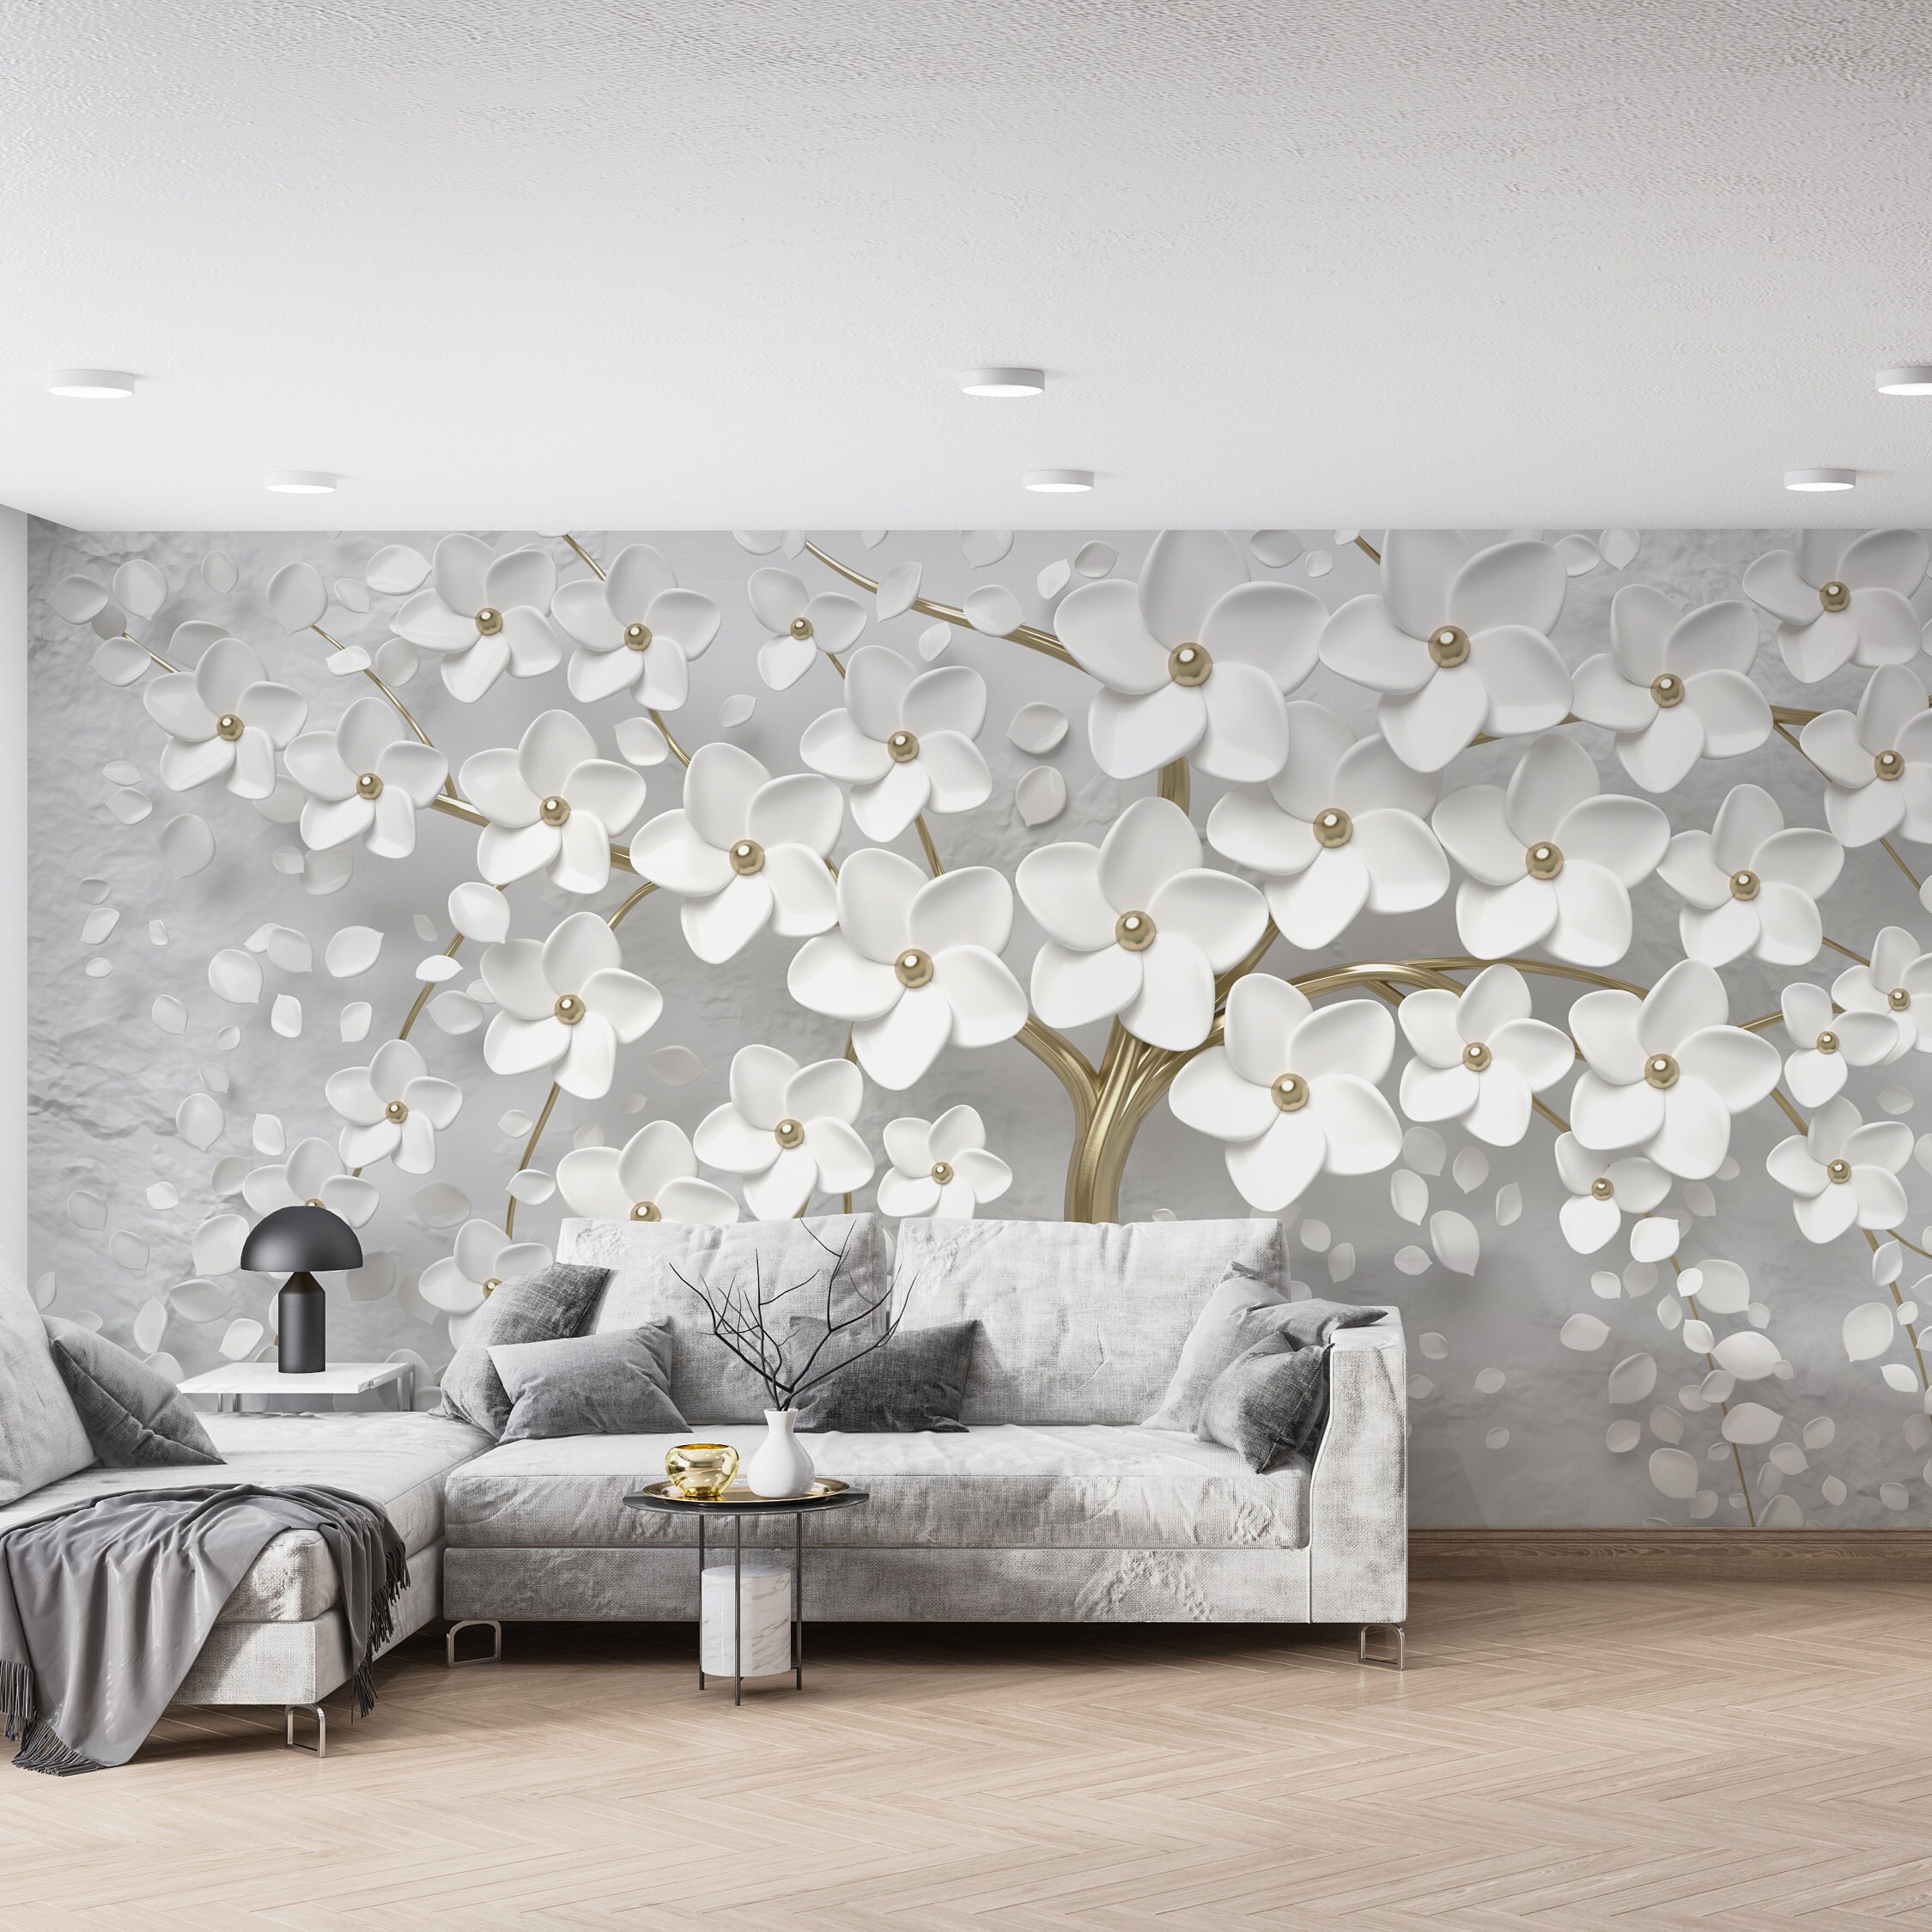 3D Flowers and Plants 957 Wall Paper Print Decal Deco Wall Mural  Self-Adhesive Wallpaper AJ US Lv (Woven Paper (Need Glue), 【164”x100”】